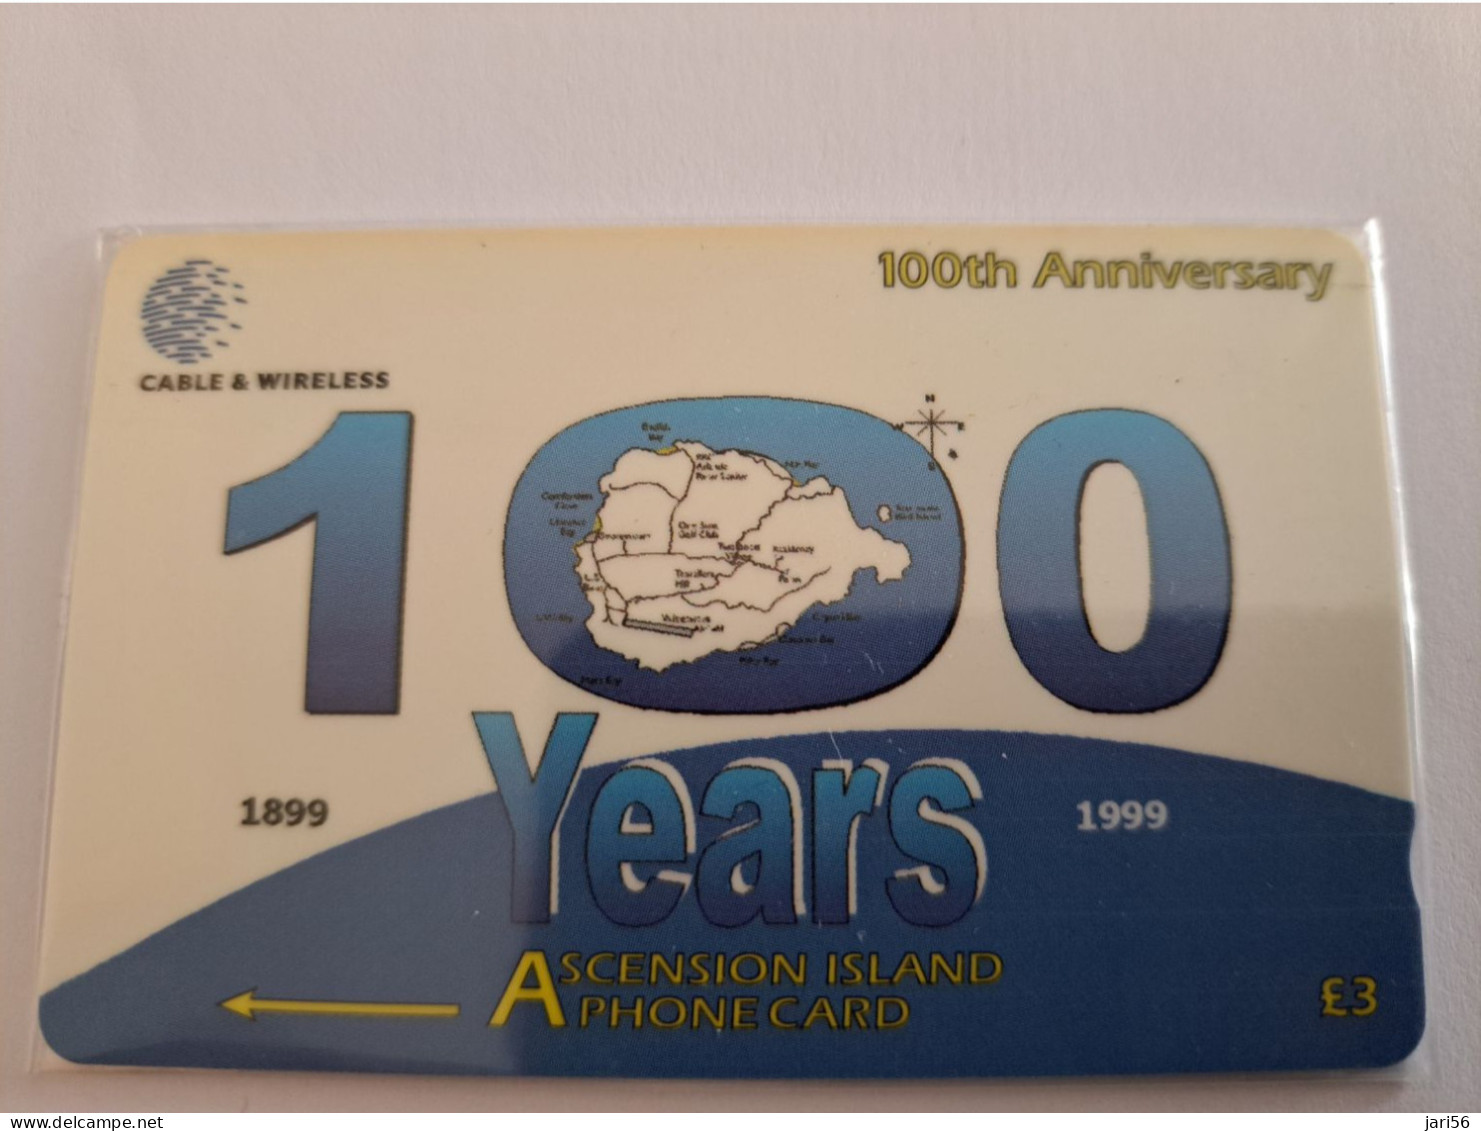 ASCENSION ISLAND   3 Pound  / 100 YEARS ANNIVERSARY /ASC-M-308A/  308CASA  MINT IN WRAPPER    NEW  Logo C&W **13663** - Ascension